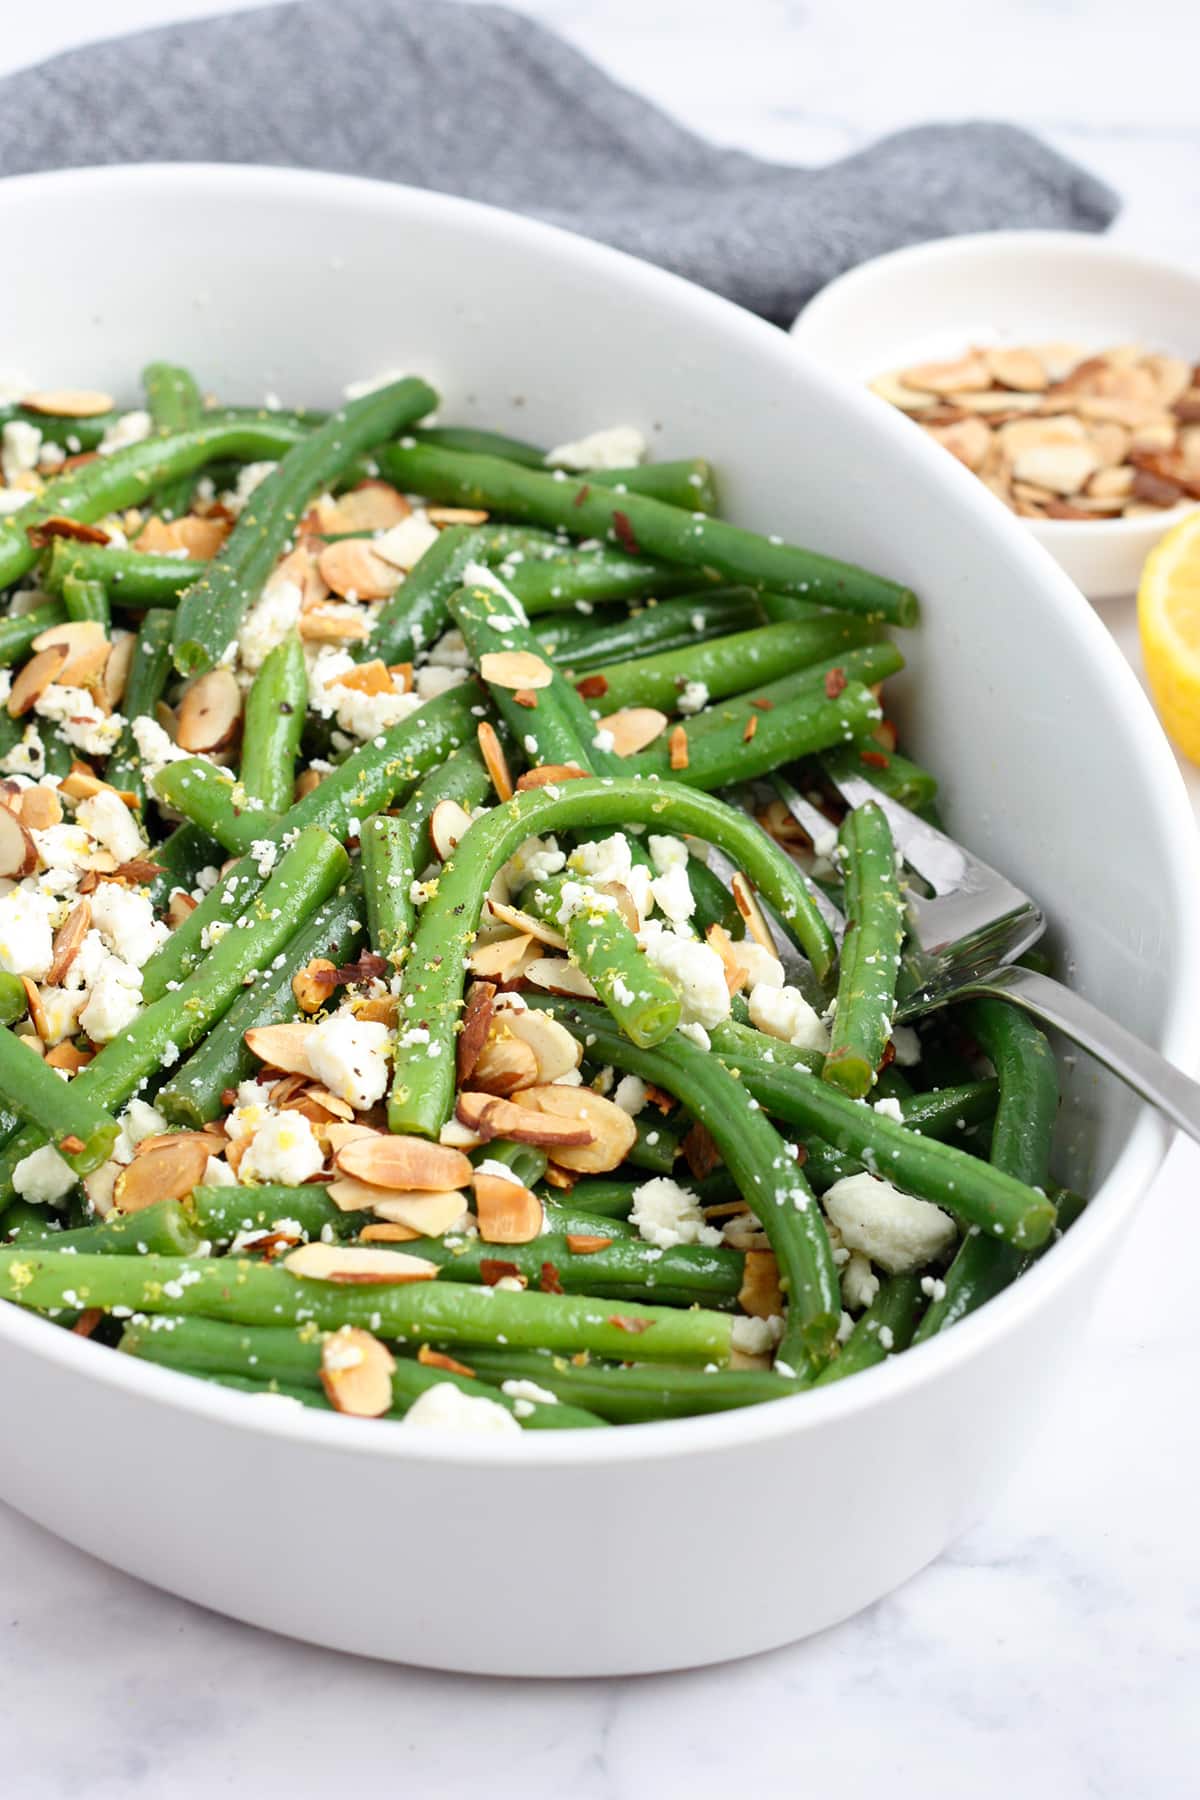 A plate of fresh green beans tossed with a lemon vinaigrette sauce.